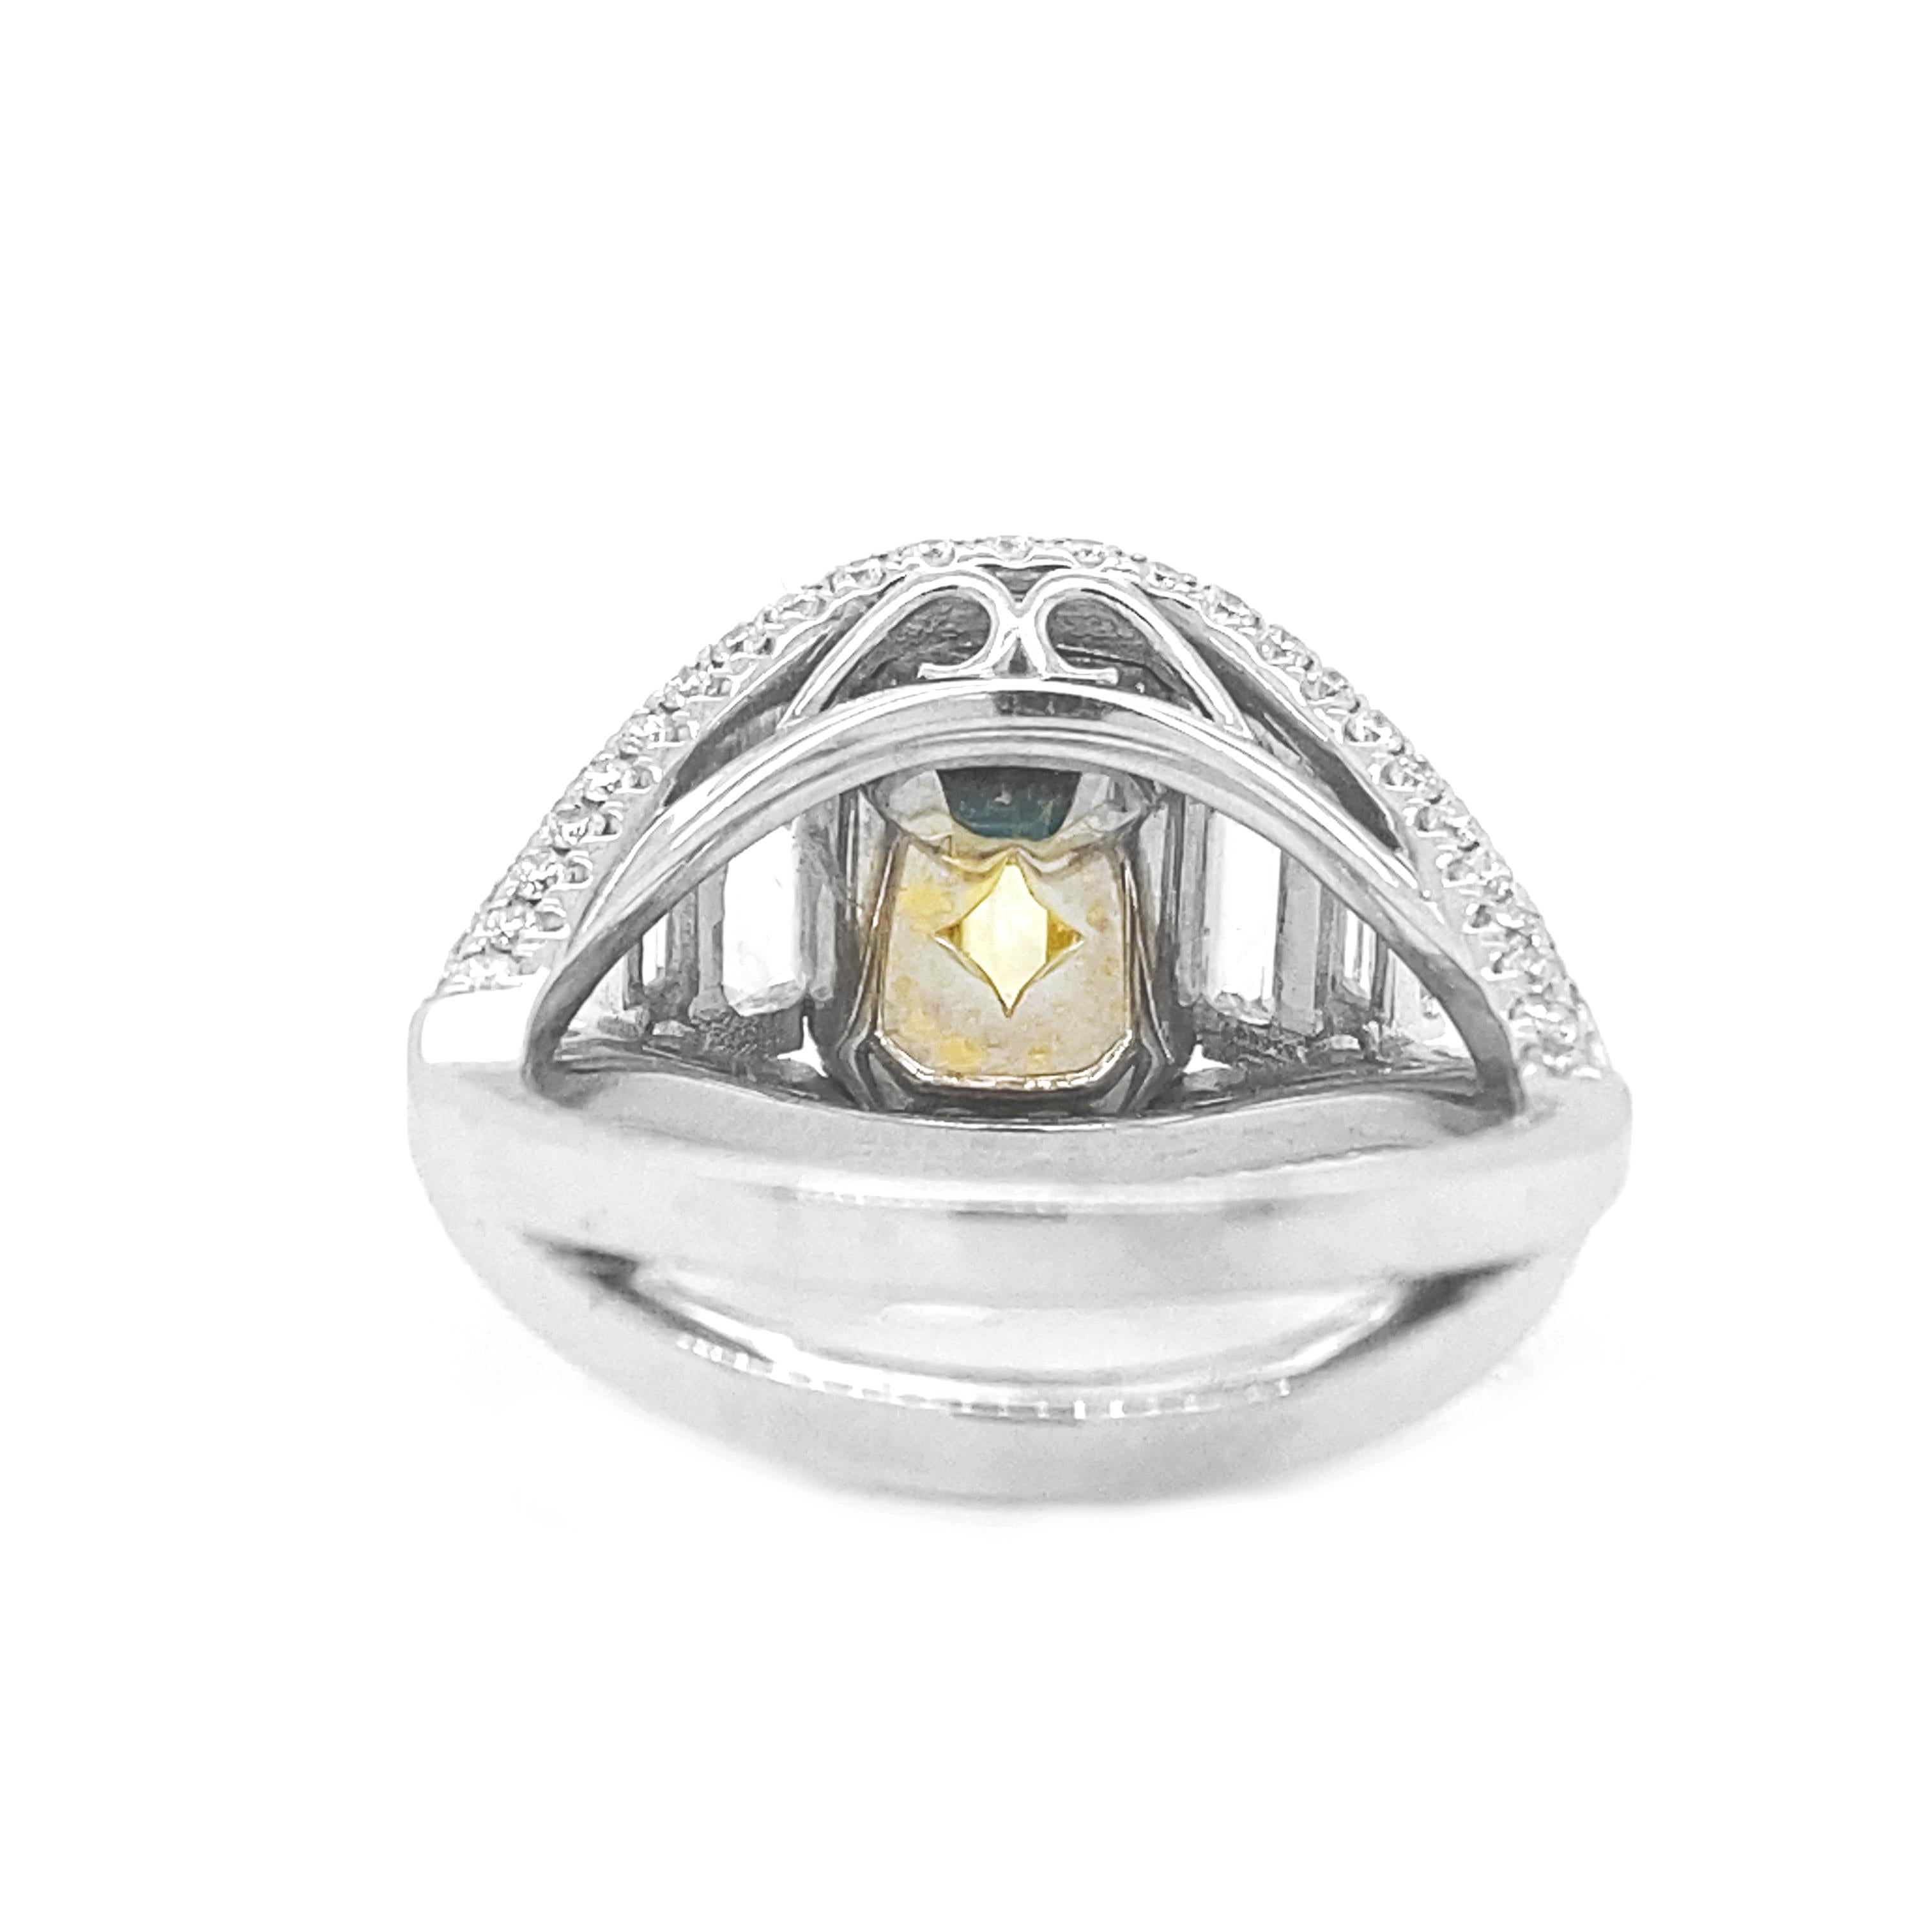 Emerald Cut 6.30 Ct T.W. Natural Fancy Yellow Emerald GIA Cert Diamond Cluster 18KT Ring For Sale